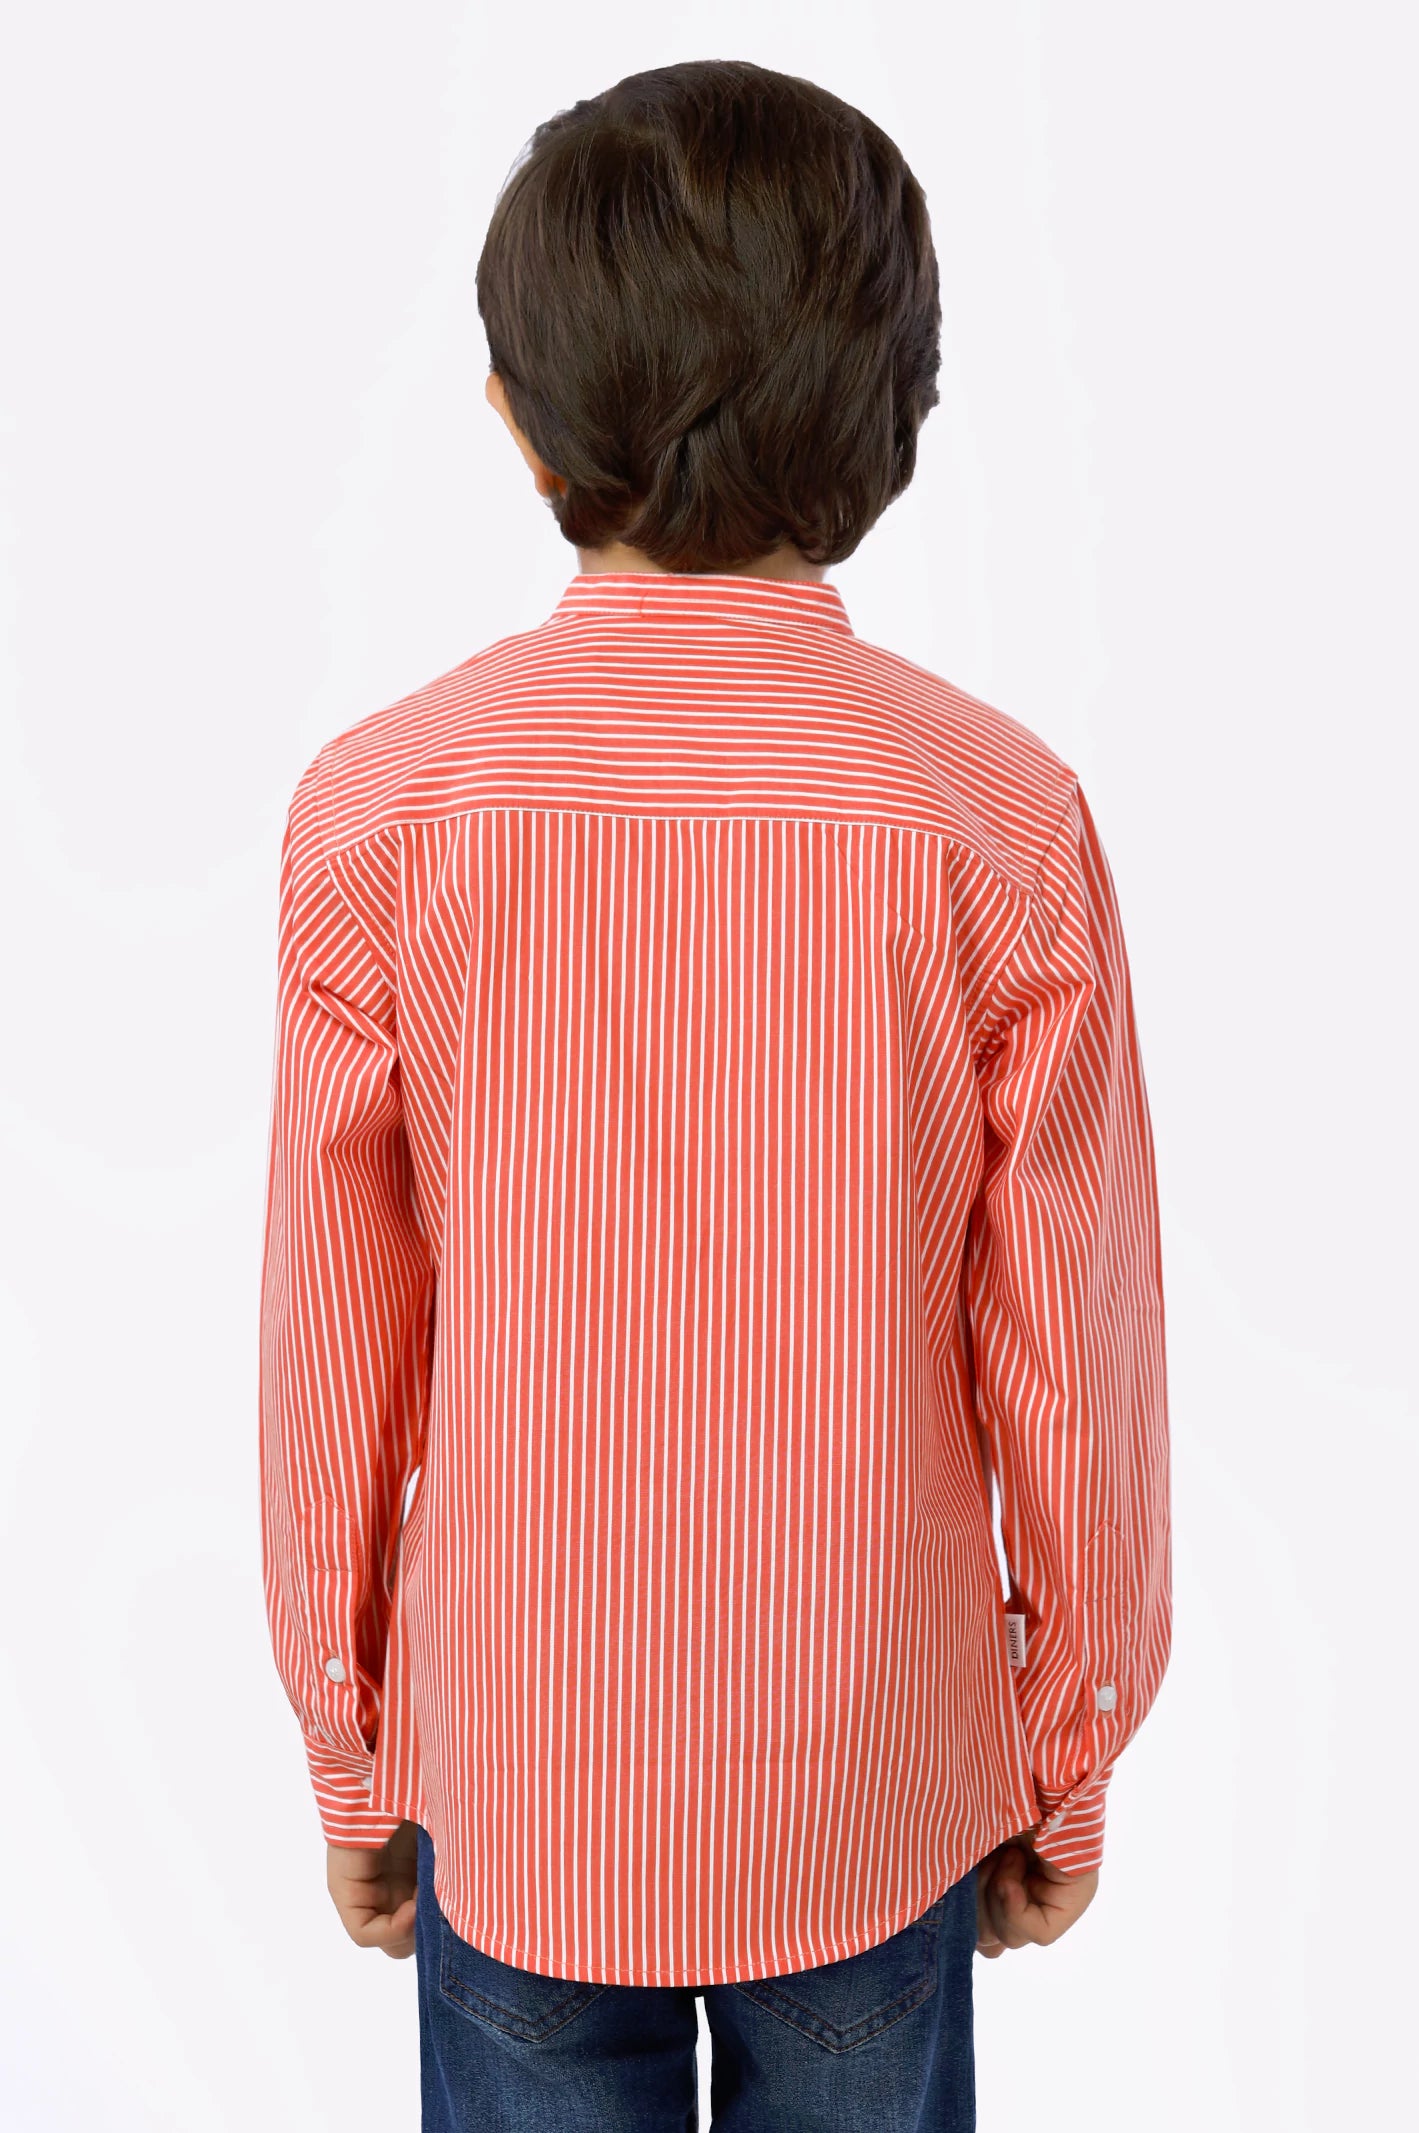 Rust Pinstripe Boys Shirt From Diners